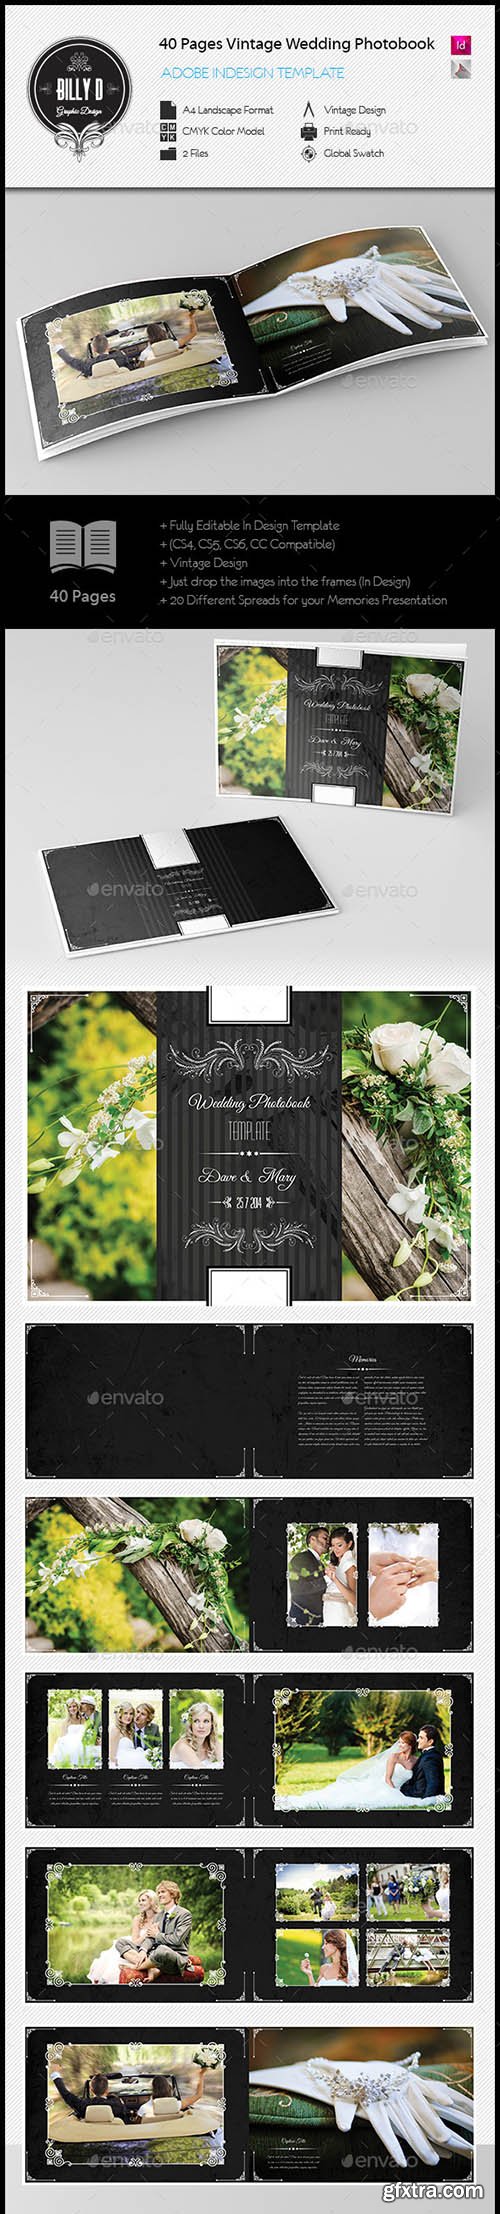 GraphicRiver 40 Pages Vintage Wedding Photobook Template 8608300